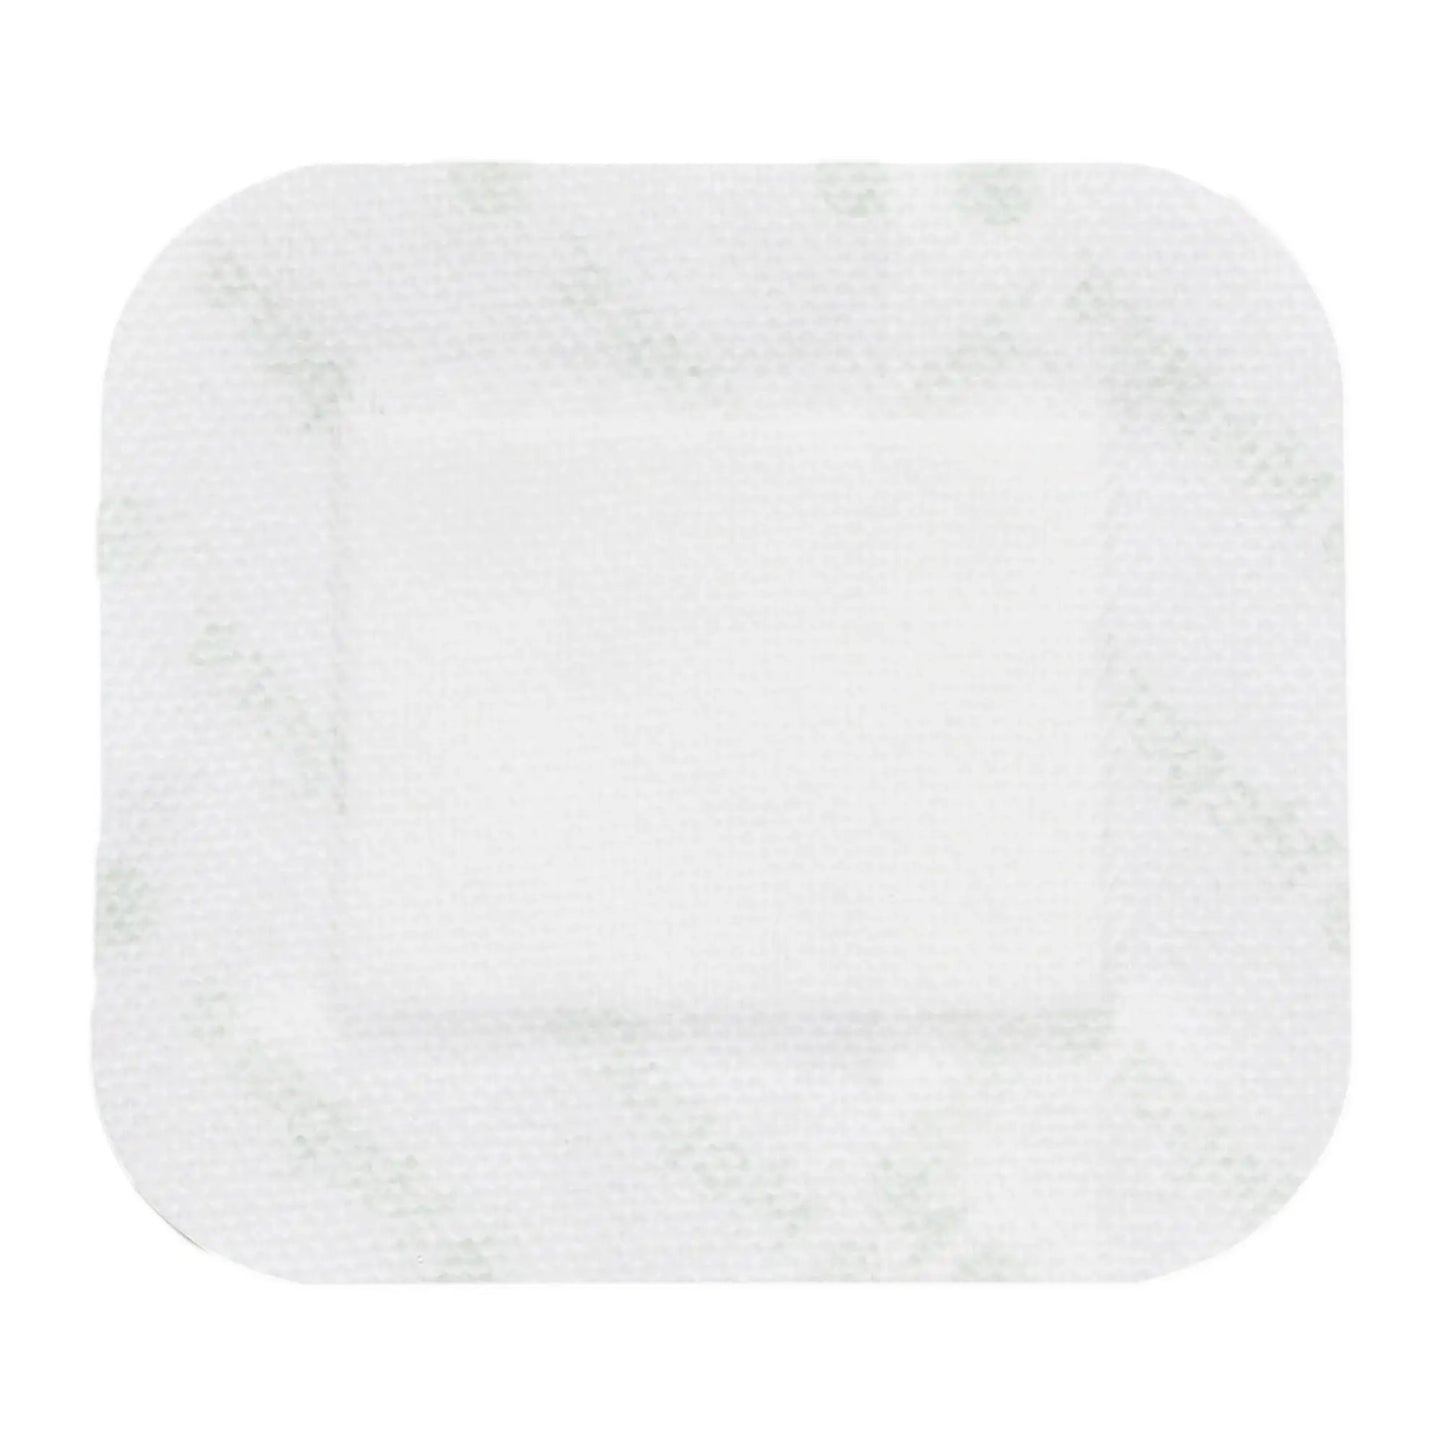 Mepore Adhesive Dressing, 2.5 x 3 Inch